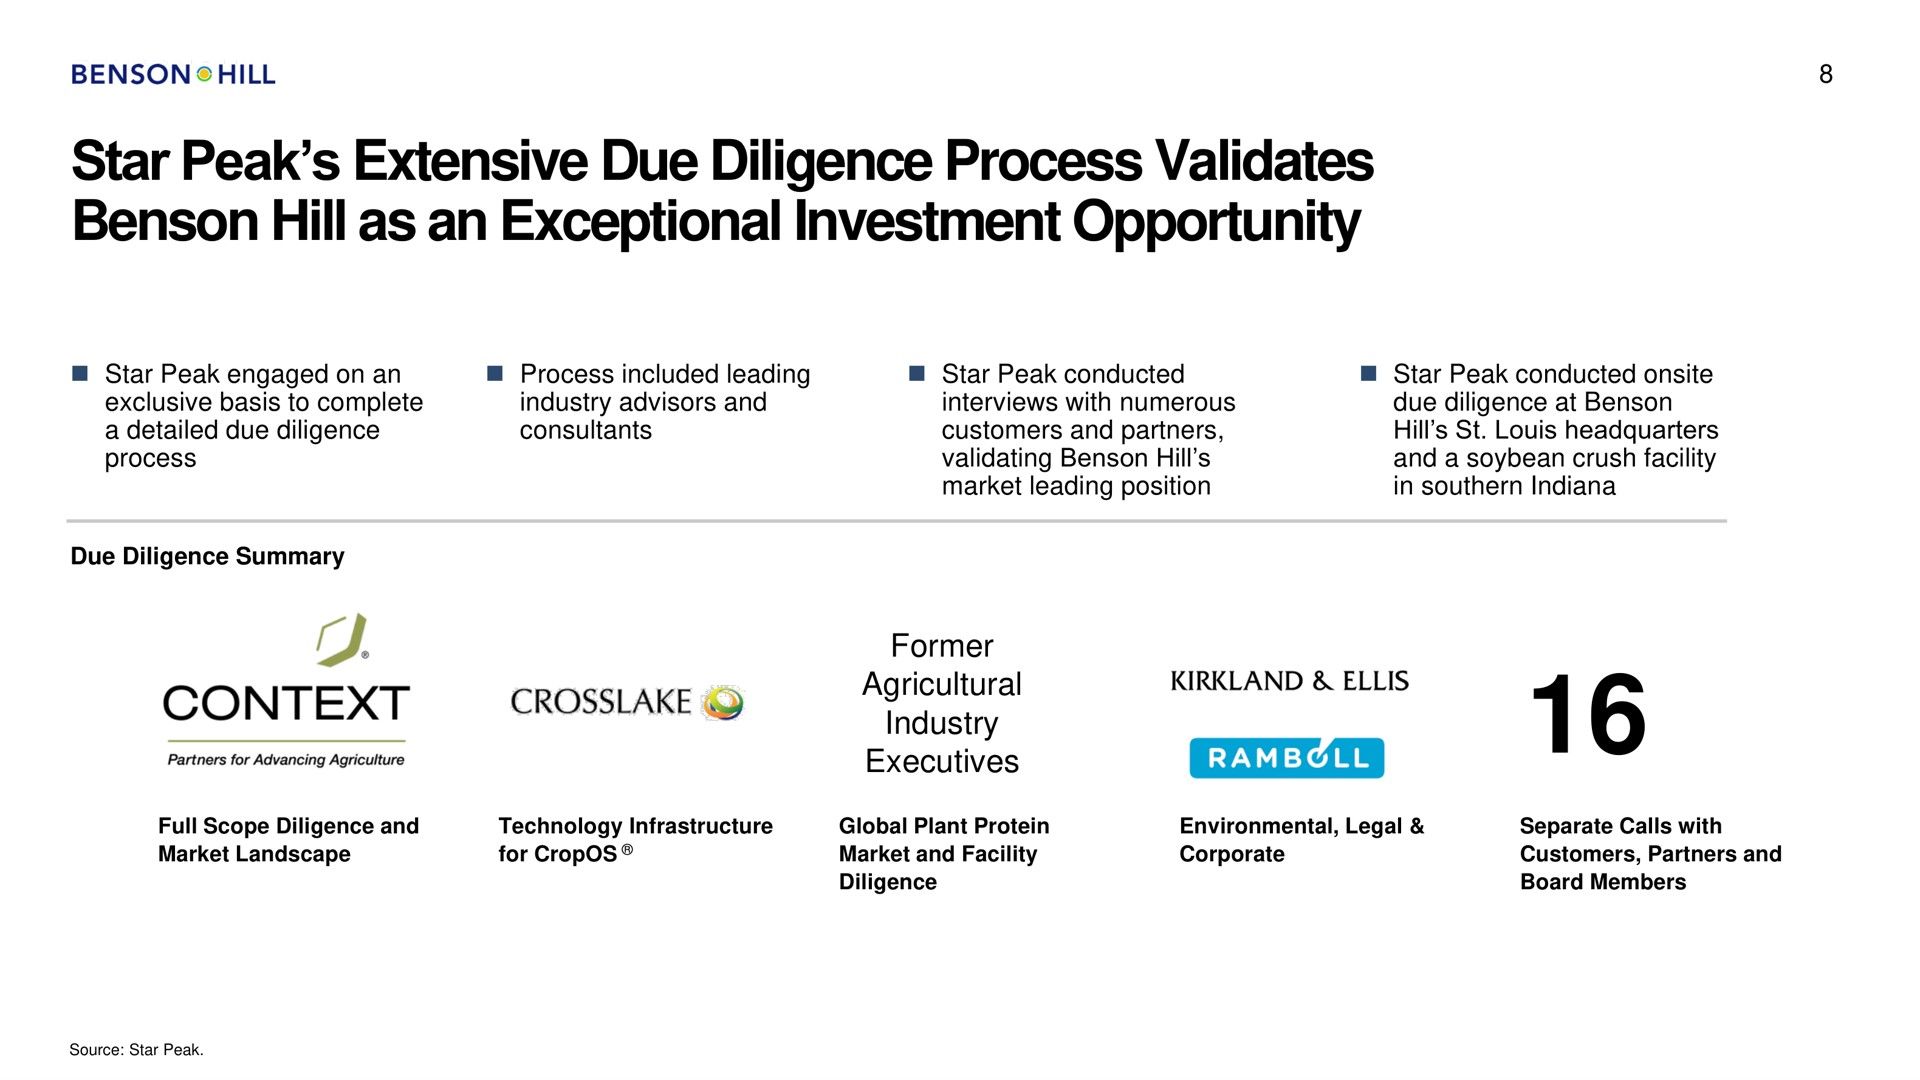 star peak extensive due diligence process validates hill as an exceptional investment opportunity context | Benson Hill